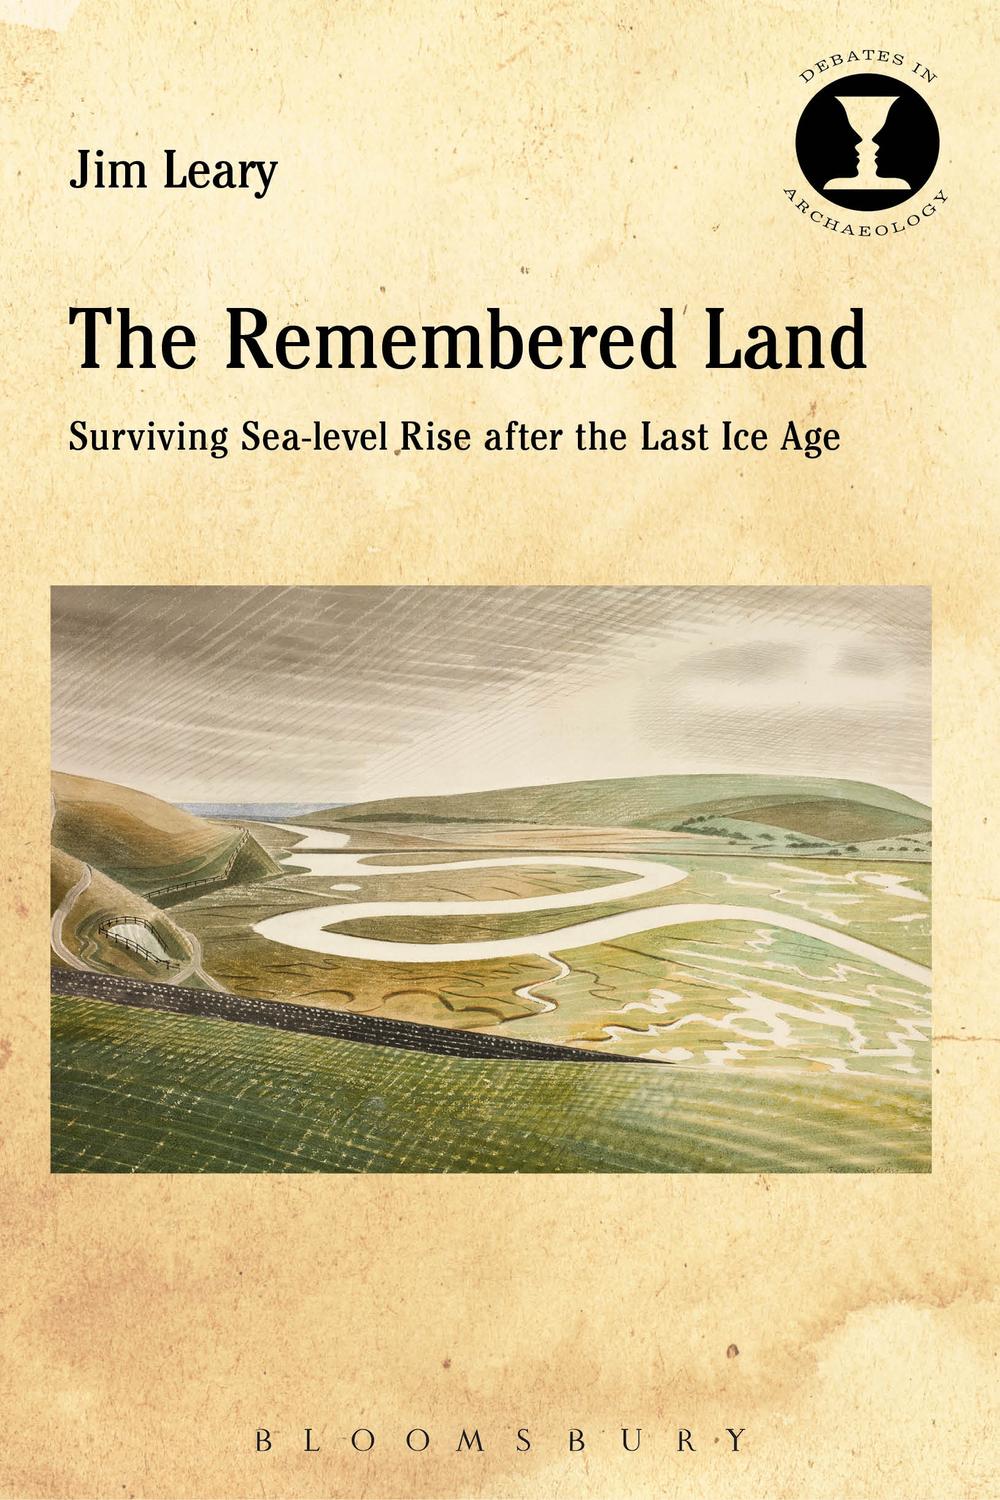 The Remembered Land - Jim Leary